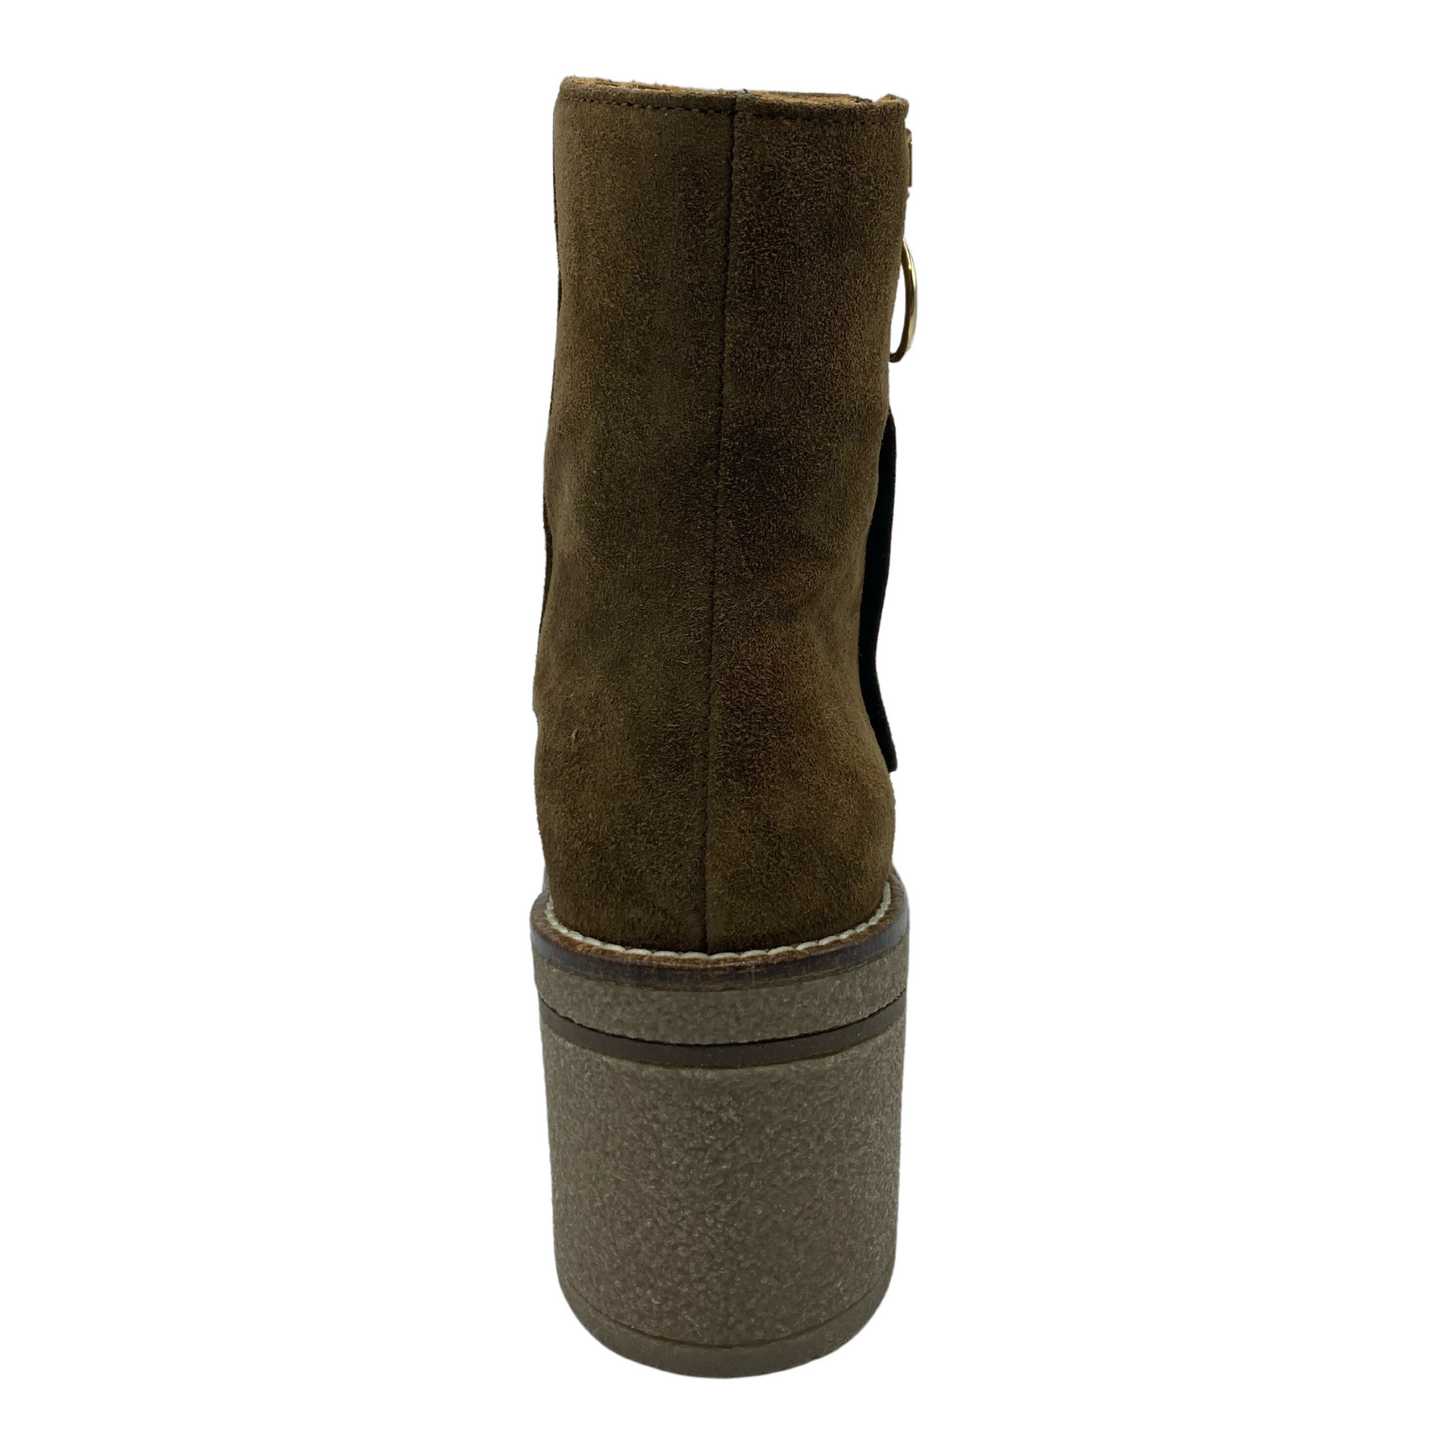 Back view of short brown suede boot with natural rubber heel